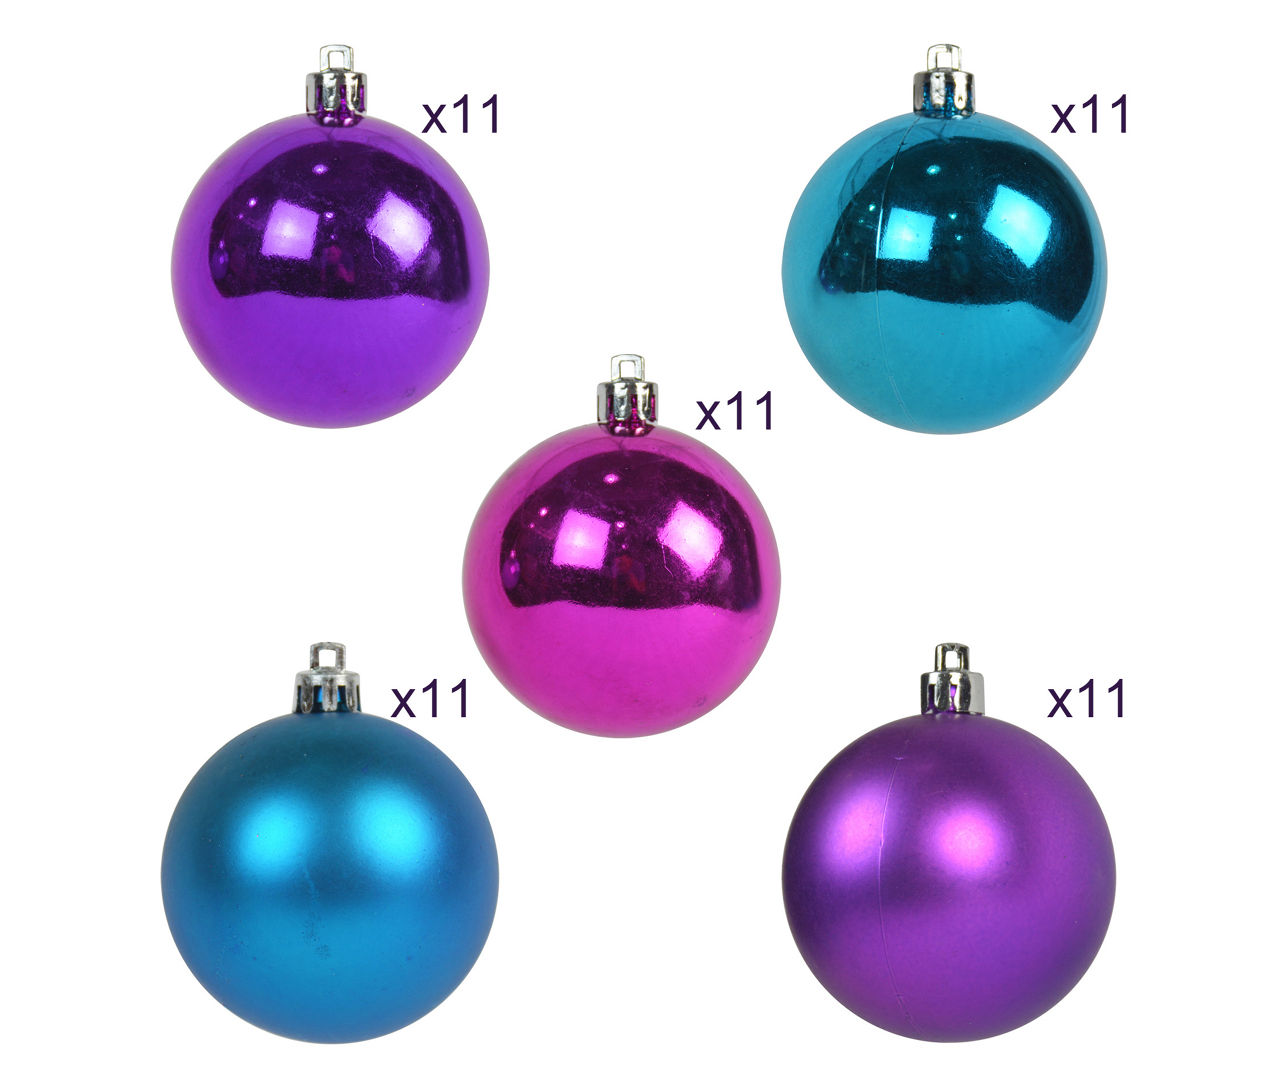 Photo of purple and pink christmas ornaments